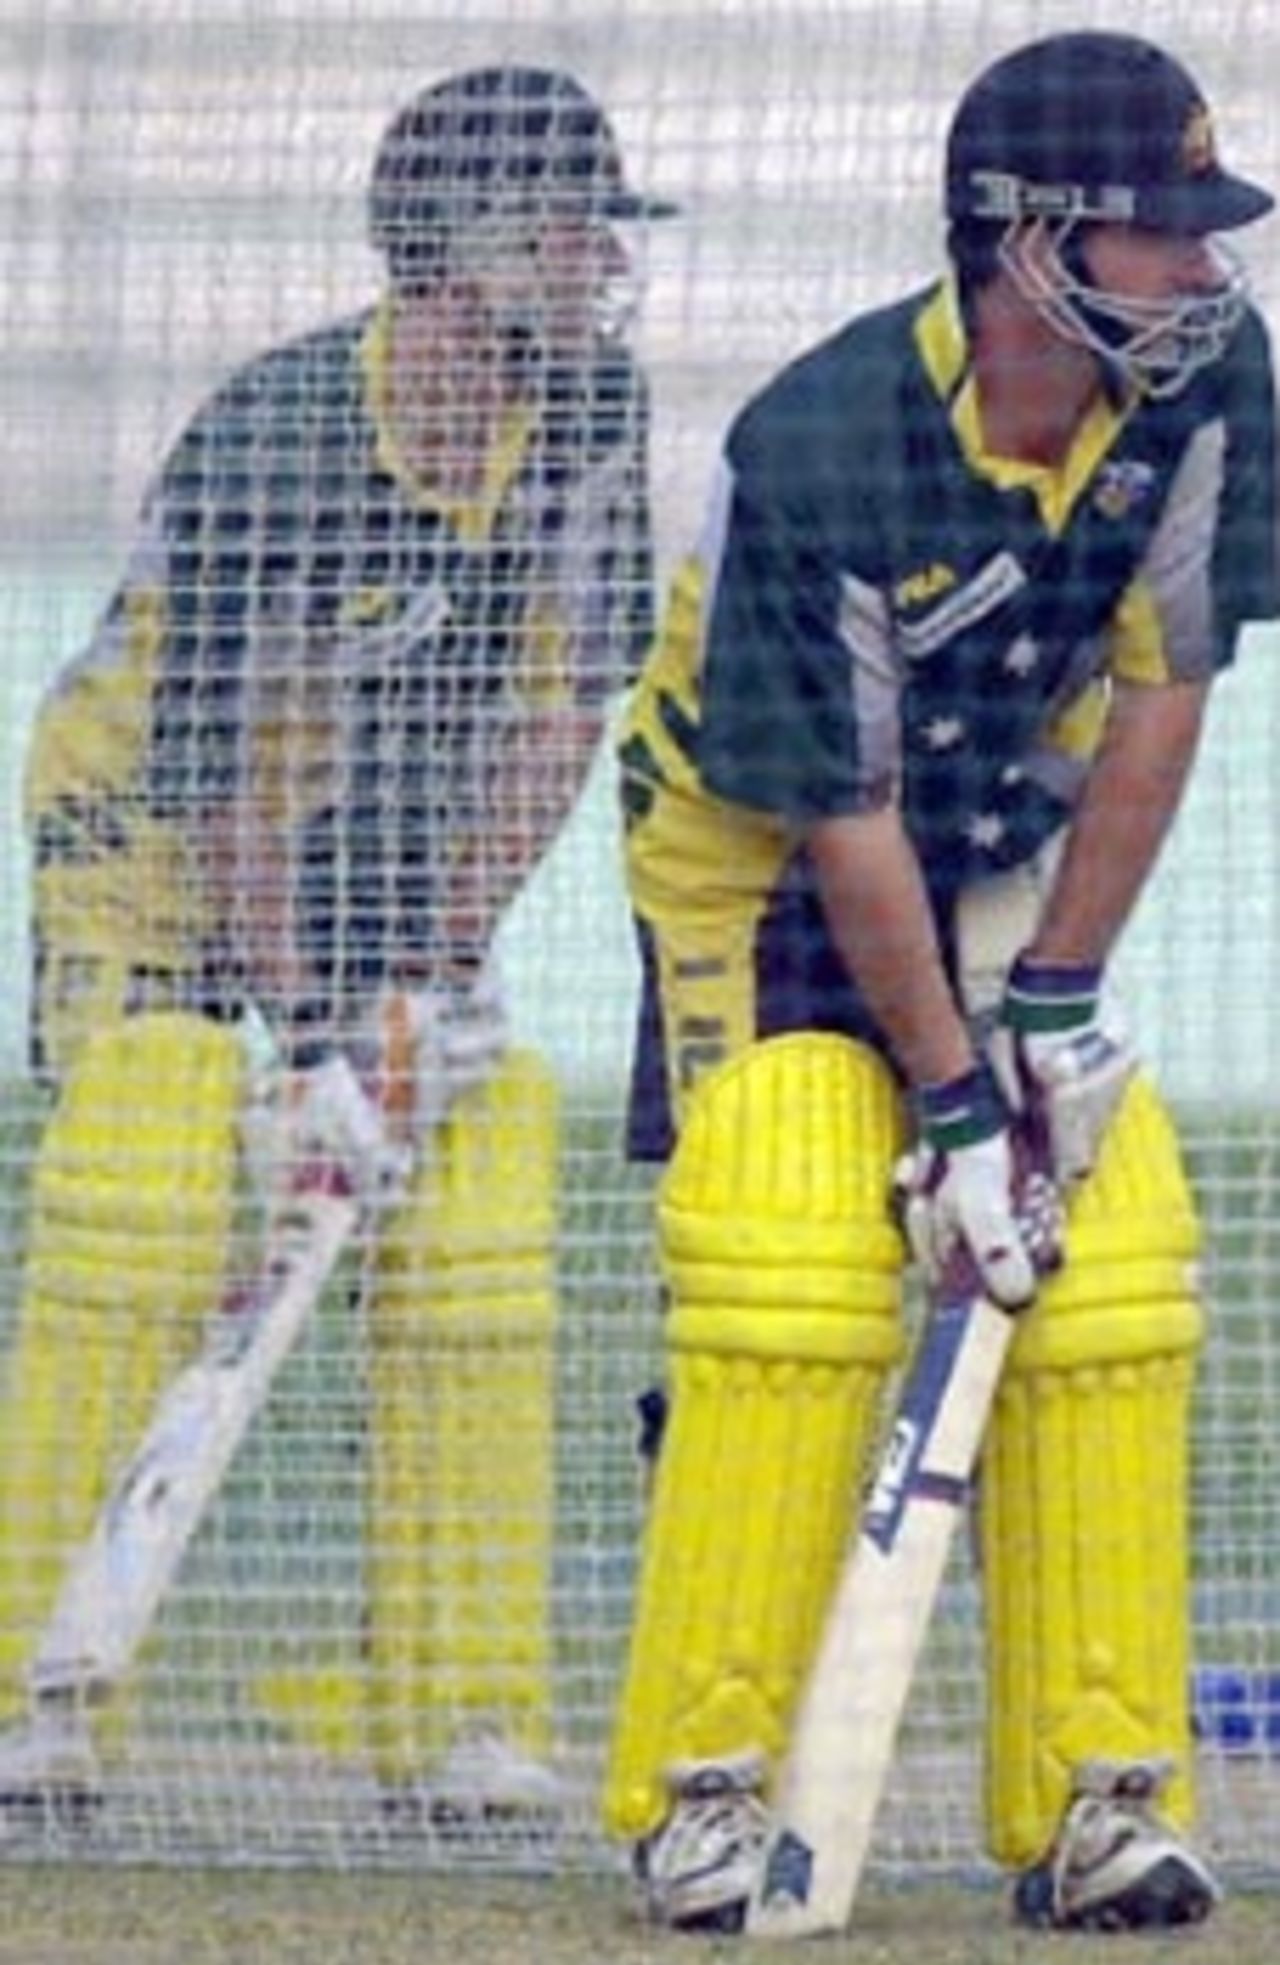 02 April 2001: The rival teams go through their practice drills before the fourth game of the one-day series at Vishakapatnam.